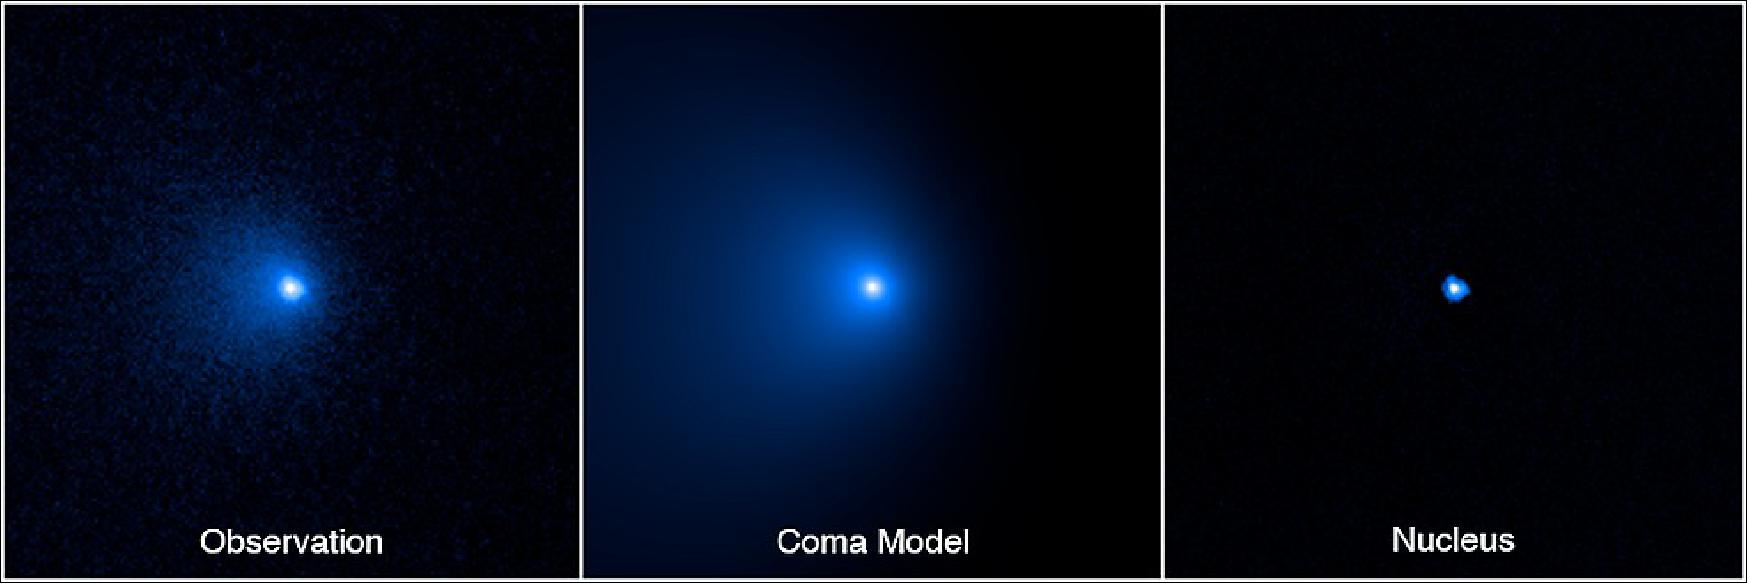 Figure 56: This sequence shows how the nucleus of Comet C/2014 UN271 (Bernardinelli-Bernstein) was isolated from a vast shell of dust and gas surrounding the solid icy nucleus. On the left is a photo of the comet taken by the NASA Hubble Space Telescope's Wide Field Camera 3 on January 8, 2022. A model of the coma (middle panel) was obtained by means of fitting the surface brightness profile assembled from the observed image on the left. This allowed for the coma to be subtracted, unveiling the point-like glow from the nucleus. Combined with radio telescope data, astronomers arrived at a precise measurement of the nucleus size. That's no small feat from something about 2 billion miles away. Though the nucleus is estimated to be as large as 85 miles across, it is so far away it cannot be resolved by Hubble. Its size is derived from its reflectivity as measured by Hubble. The nucleus is estimated to be as black as charcoal. The nucleus area is gleaned from radio observations [Credits: SCIENCE: NASA, ESA, Man-To Hui (Macau University of Science and Technology), David Jewitt (UCLA) Image Processing: Alyssa Pagan (STScI)]